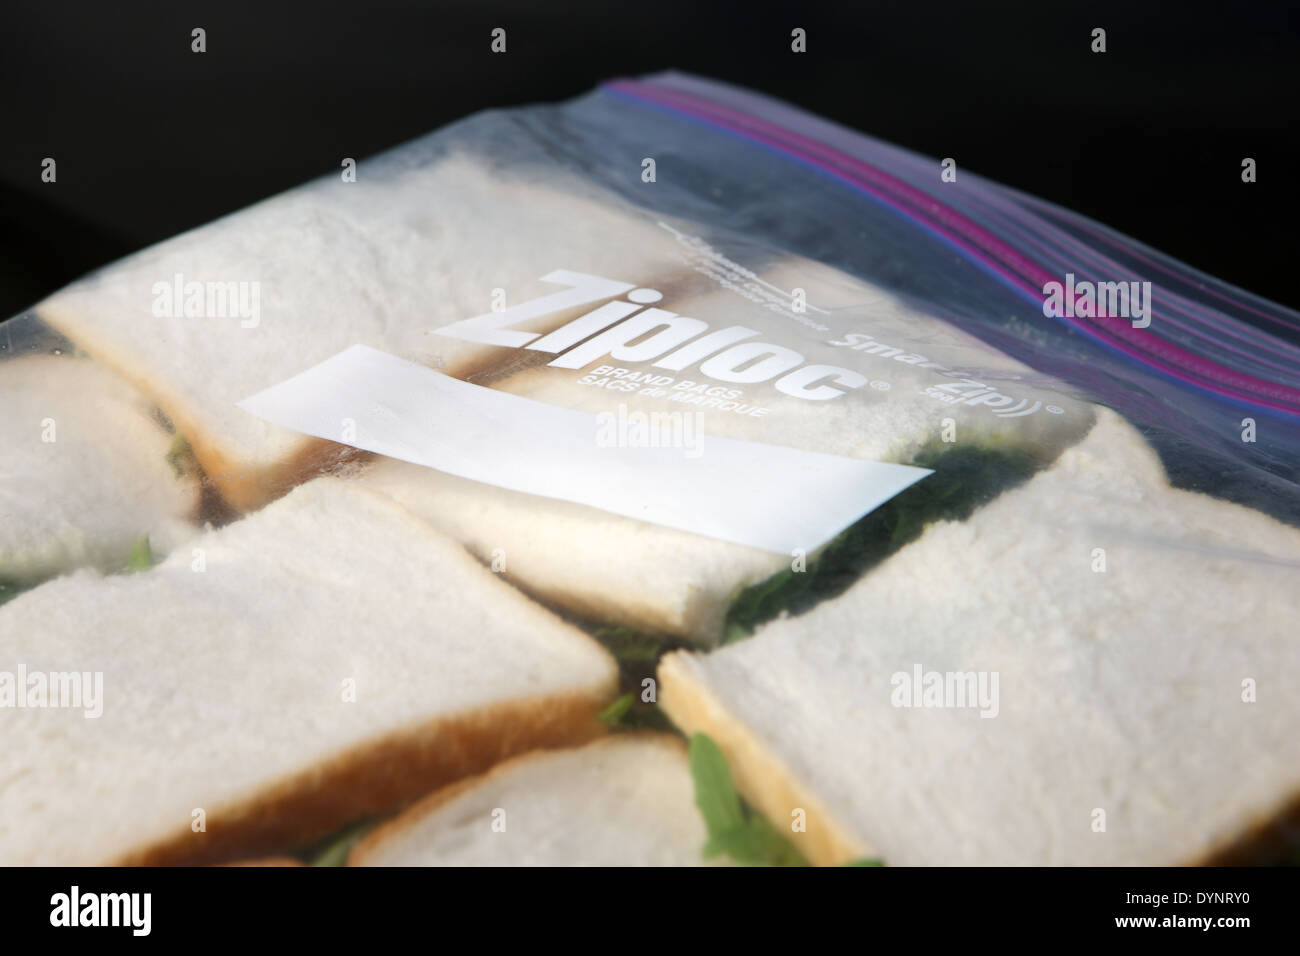 https://c8.alamy.com/comp/DYNRY0/ziploc-bag-packed-with-white-bread-sandwiches-DYNRY0.jpg